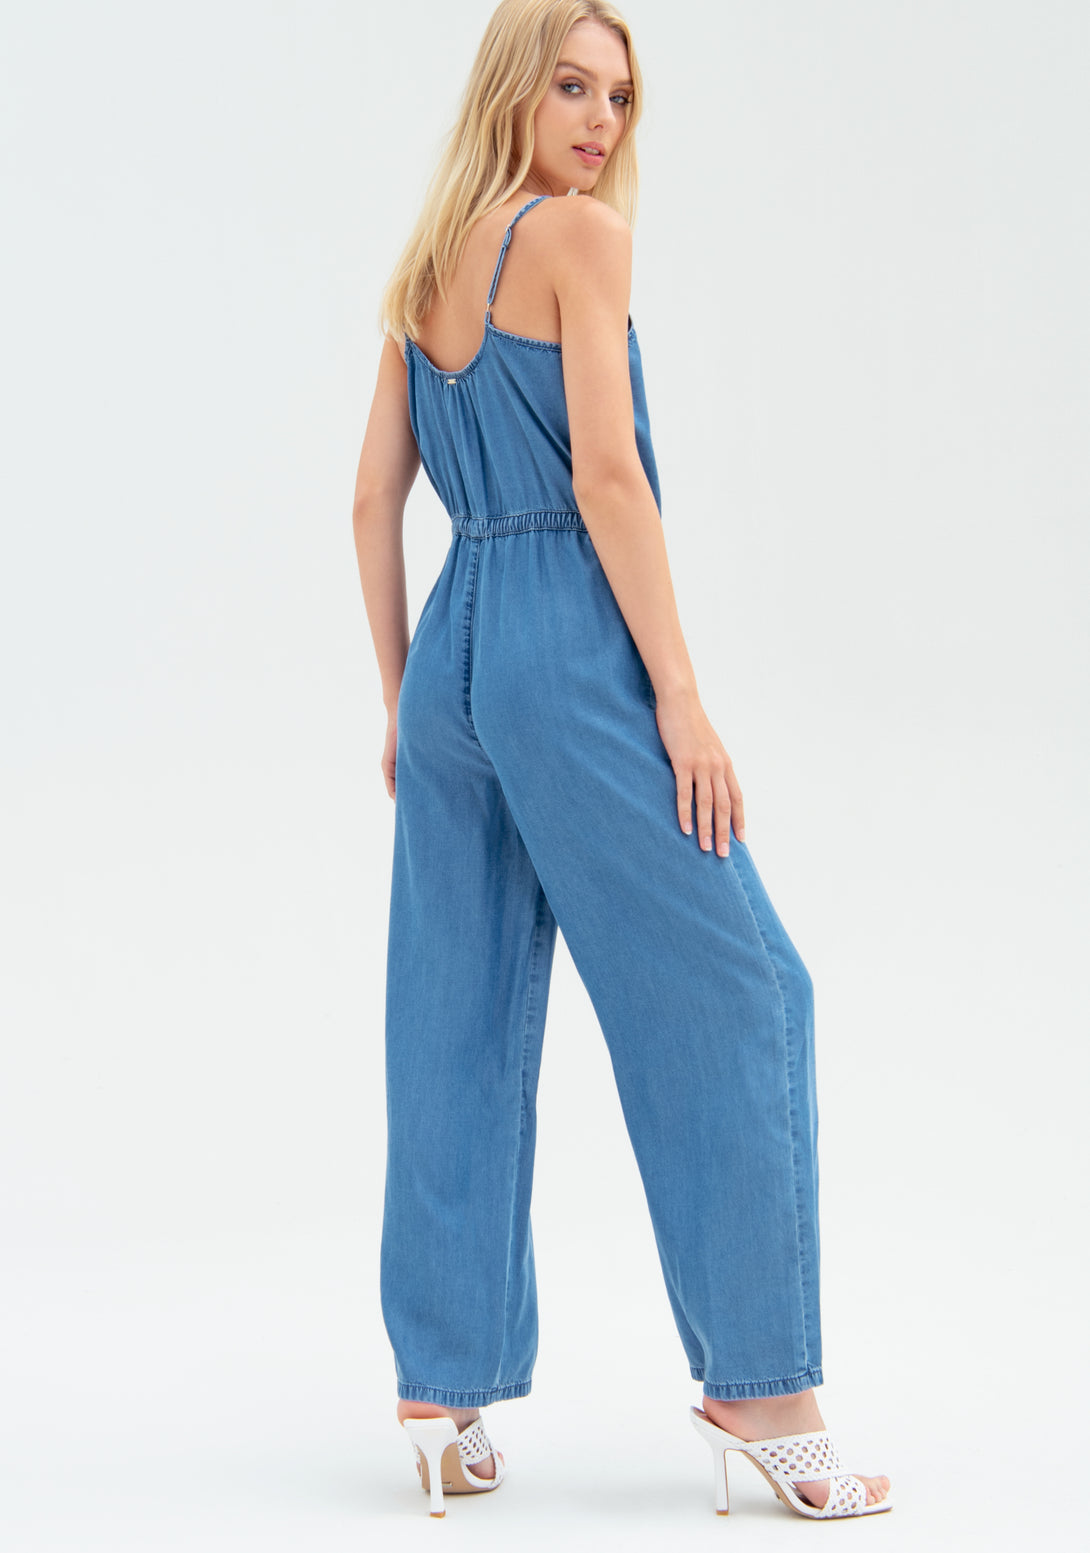 Jumpsuit regular fit made in chambray